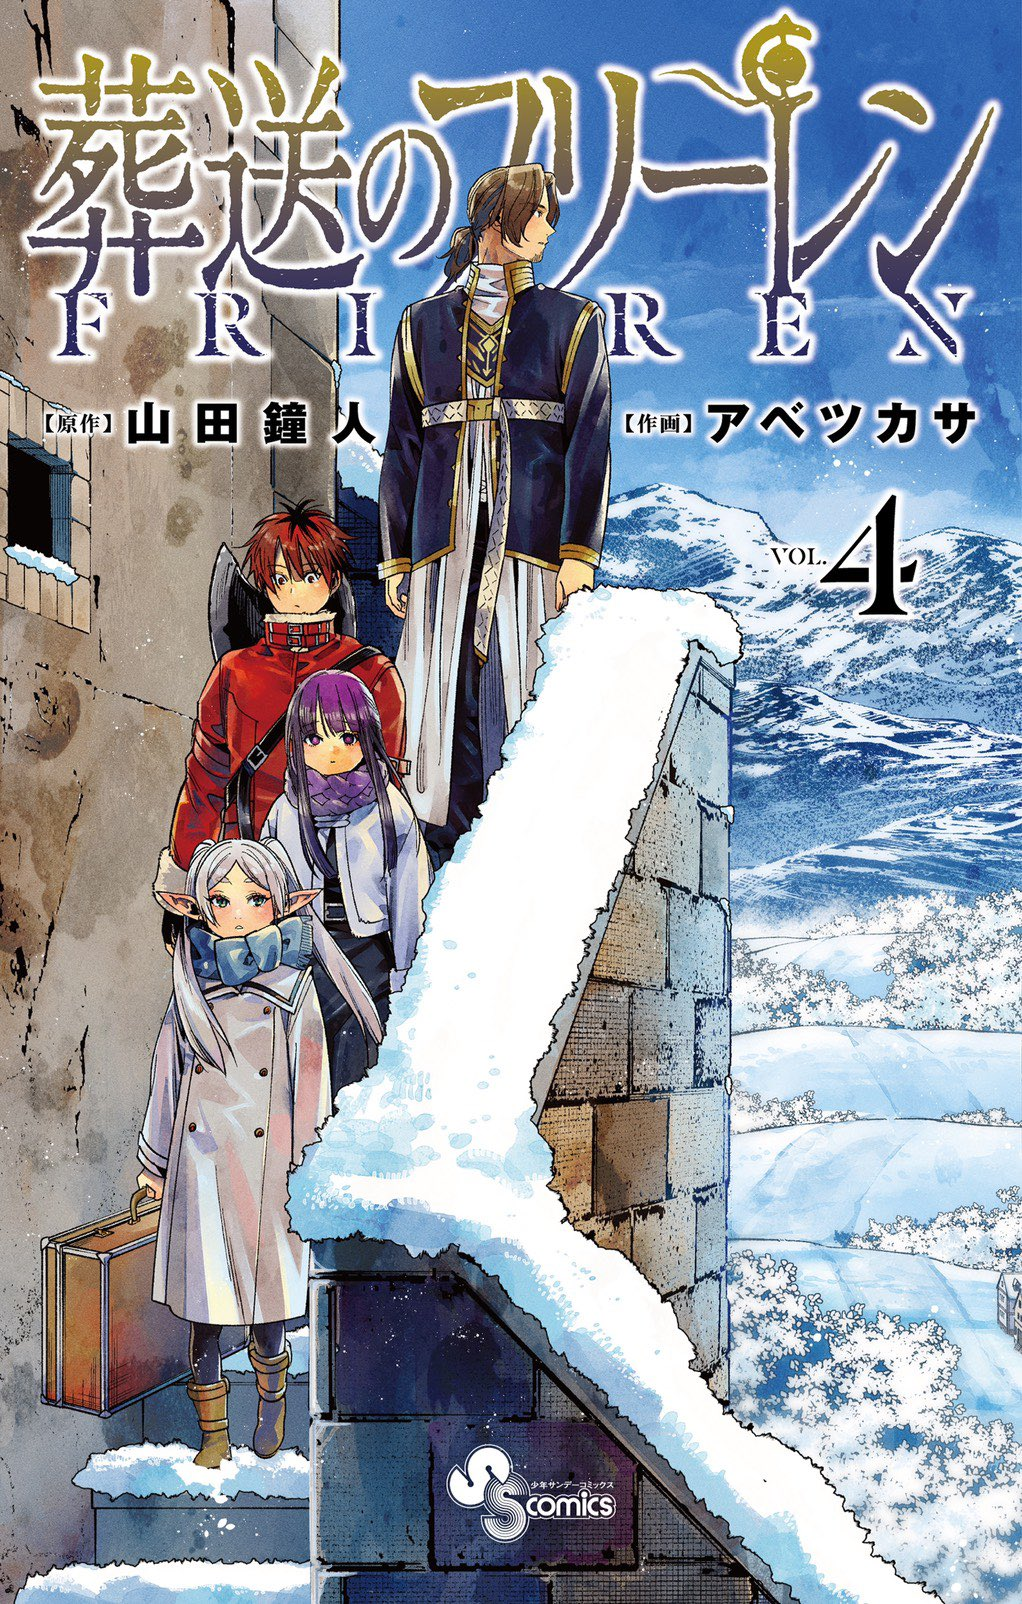 Frieren Light Novel Comes with Volume 12 - Siliconera